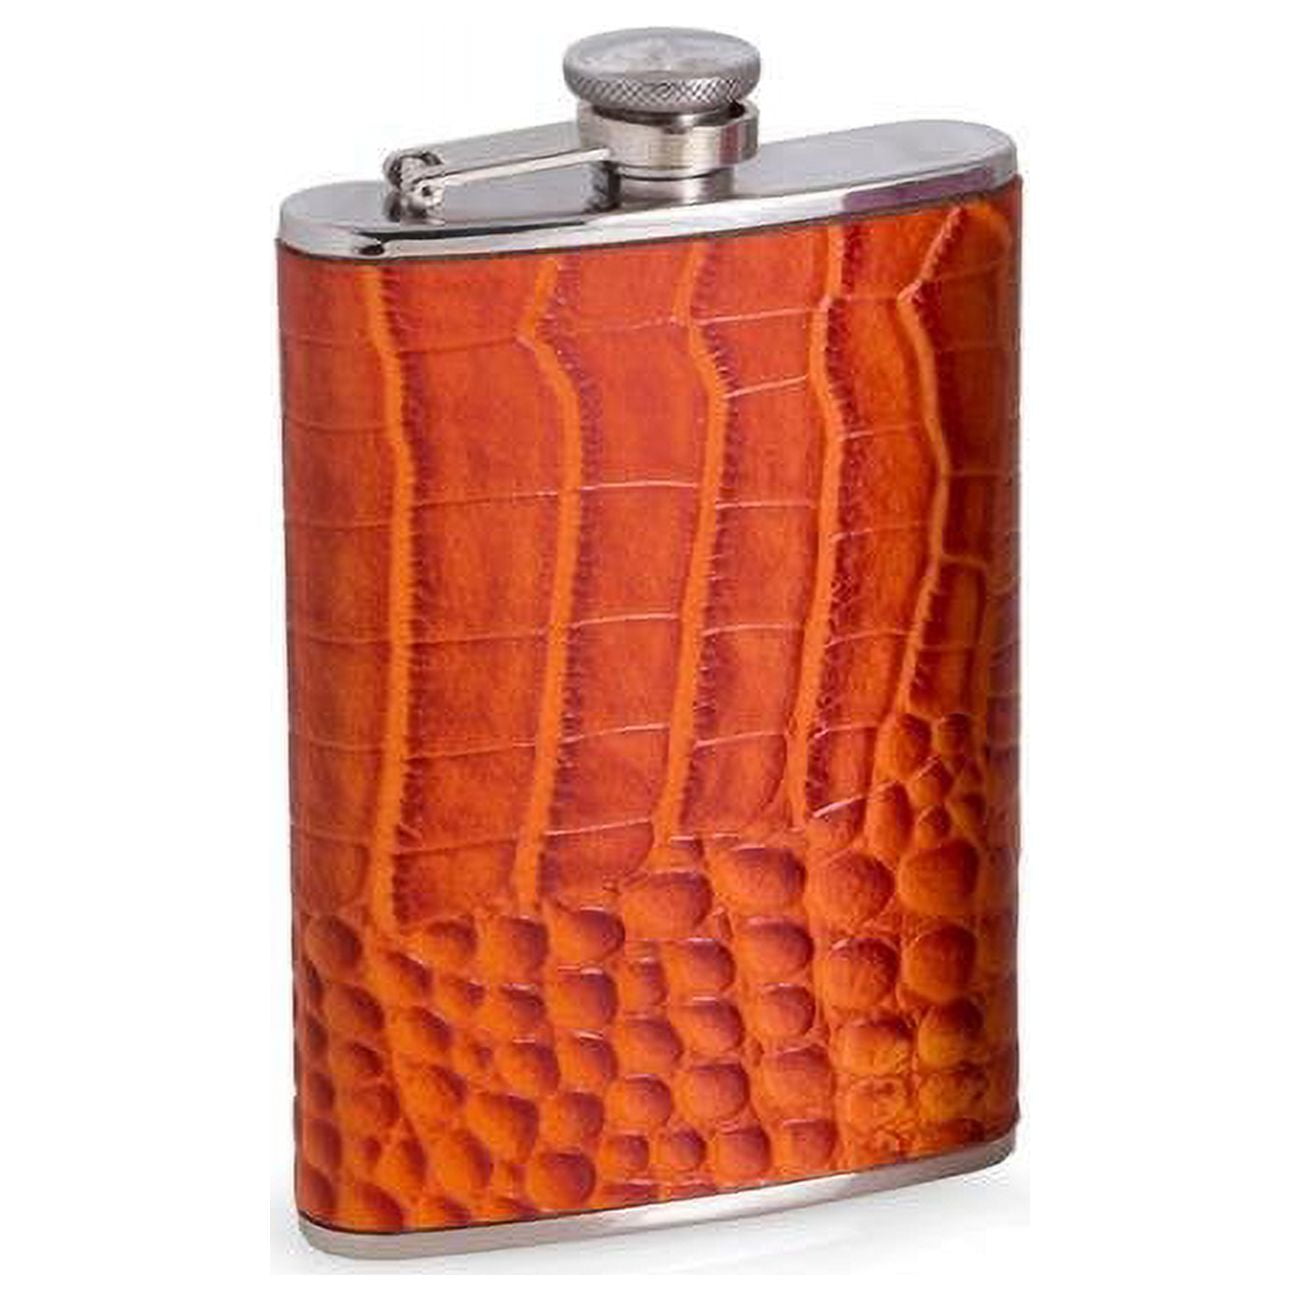 Picture of Bey-Berk International FS268 8 oz Stainless Steel Croco Leather Flask with Captive Cap &amp; Durable Rubber Seal - Orange &amp; Silver